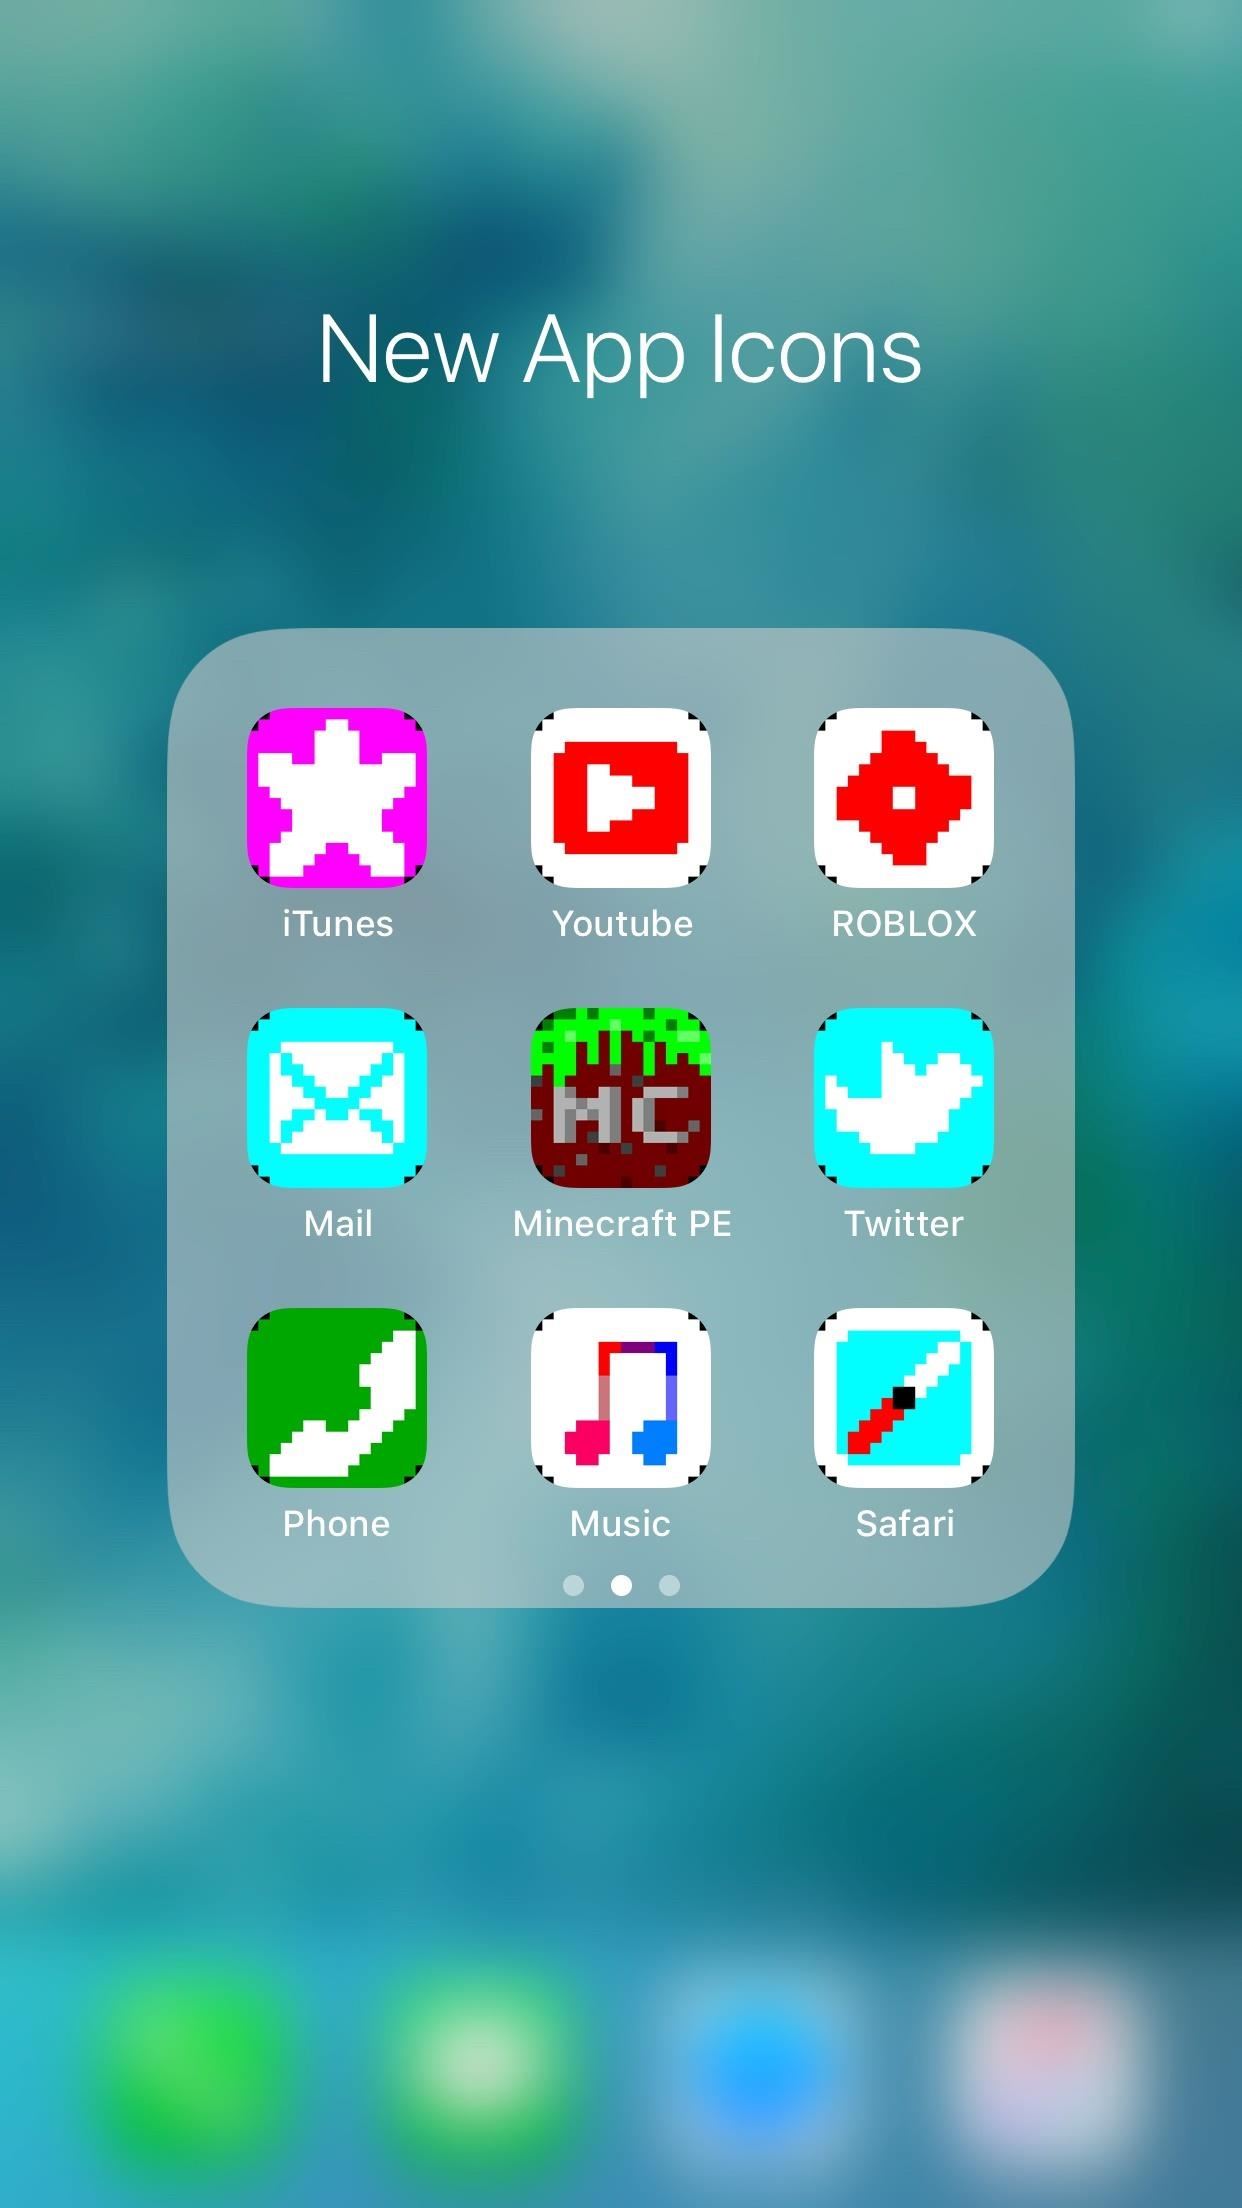 How To Theme The Home Screen App Icons On Your Iphone Without